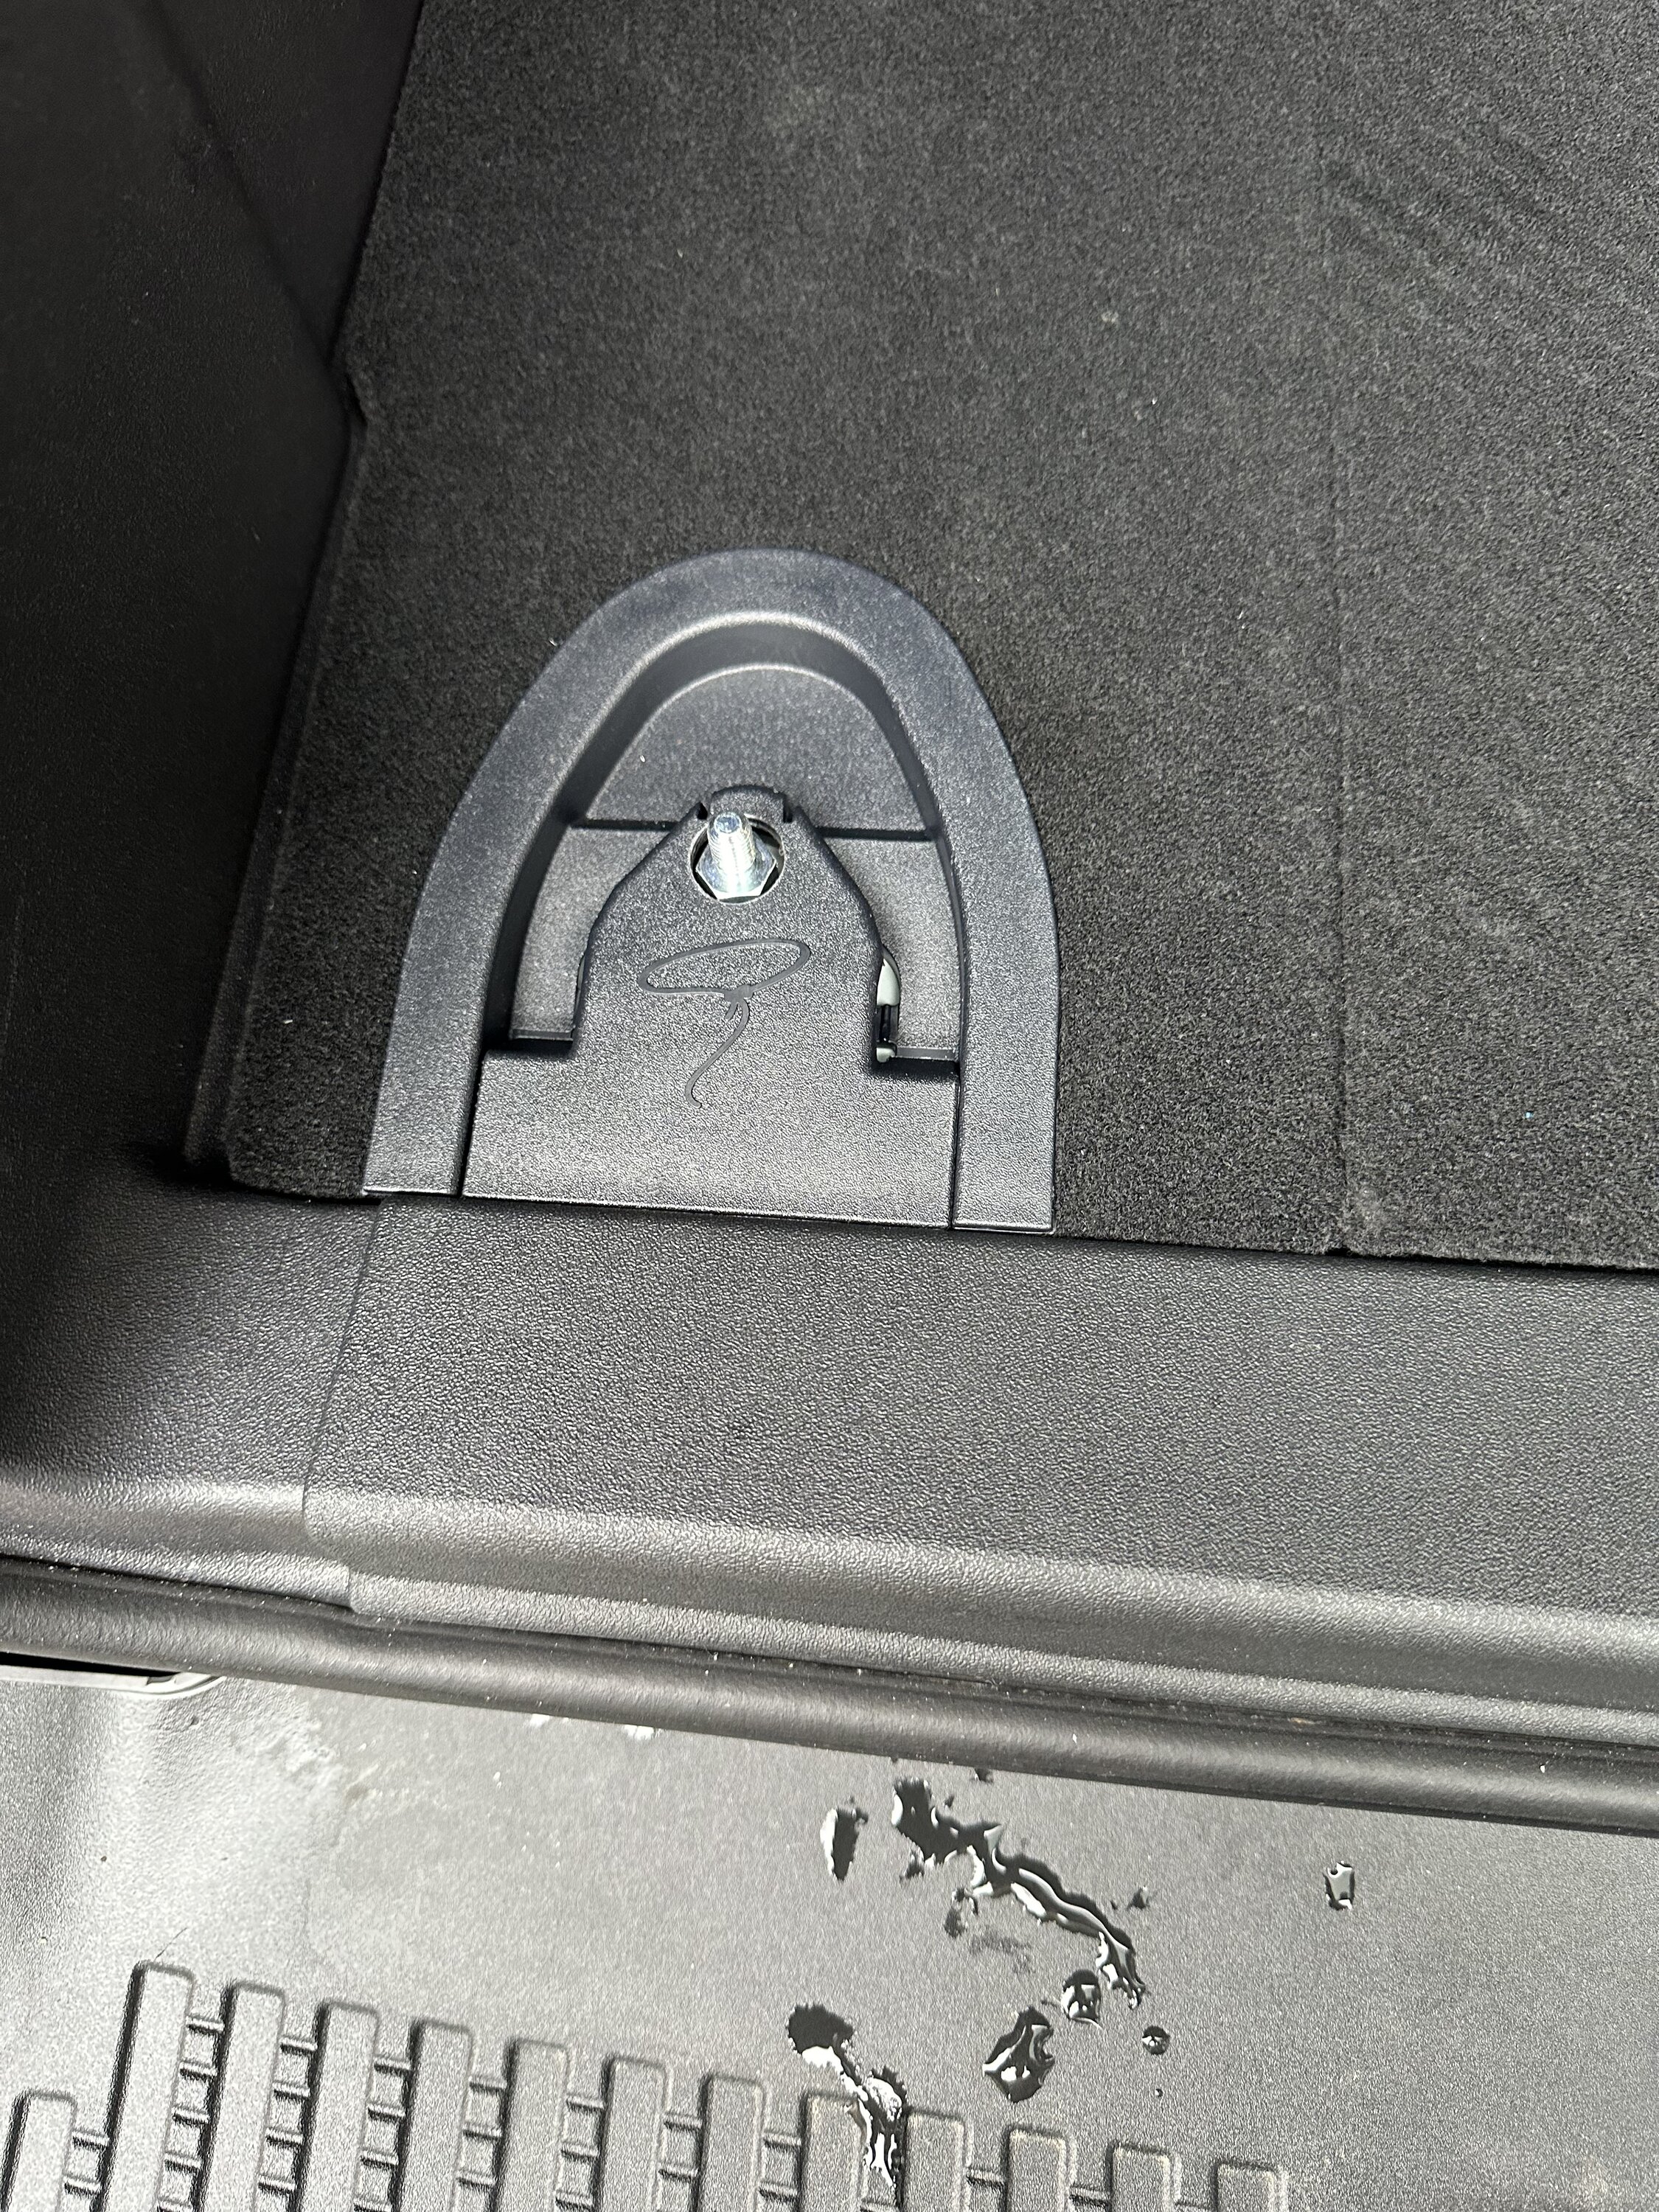 Ford Bronco Review & Pics: 2021 Bronco Cargo Area Security Drawer IMG_3384